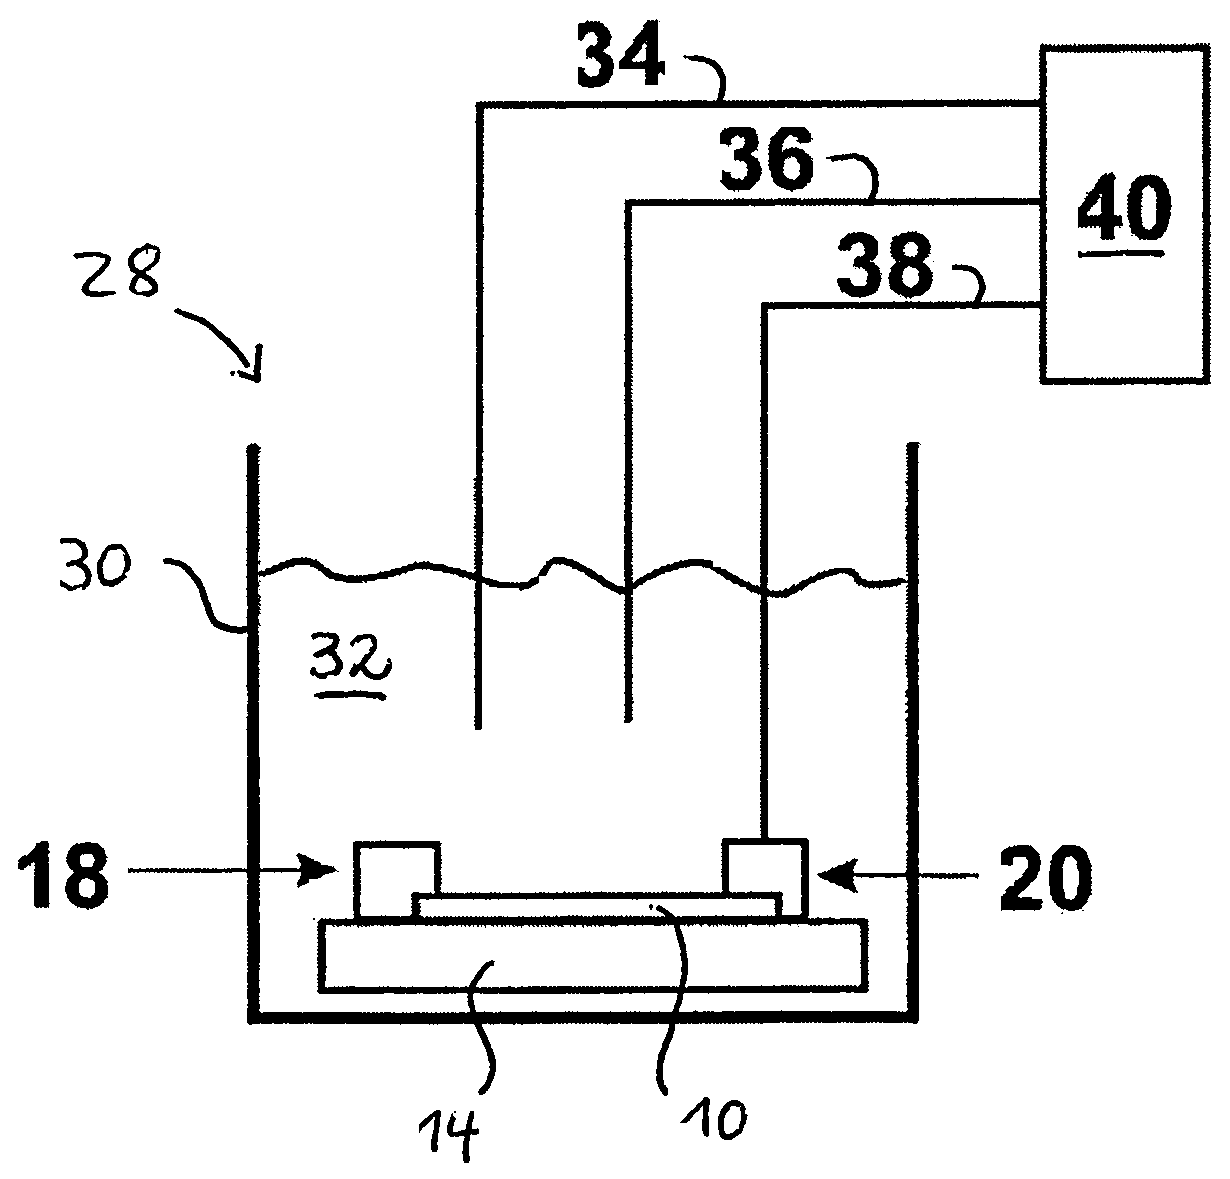 Method of fabricating carbon nanotube field-effect transistors through controlled electrochemical modification